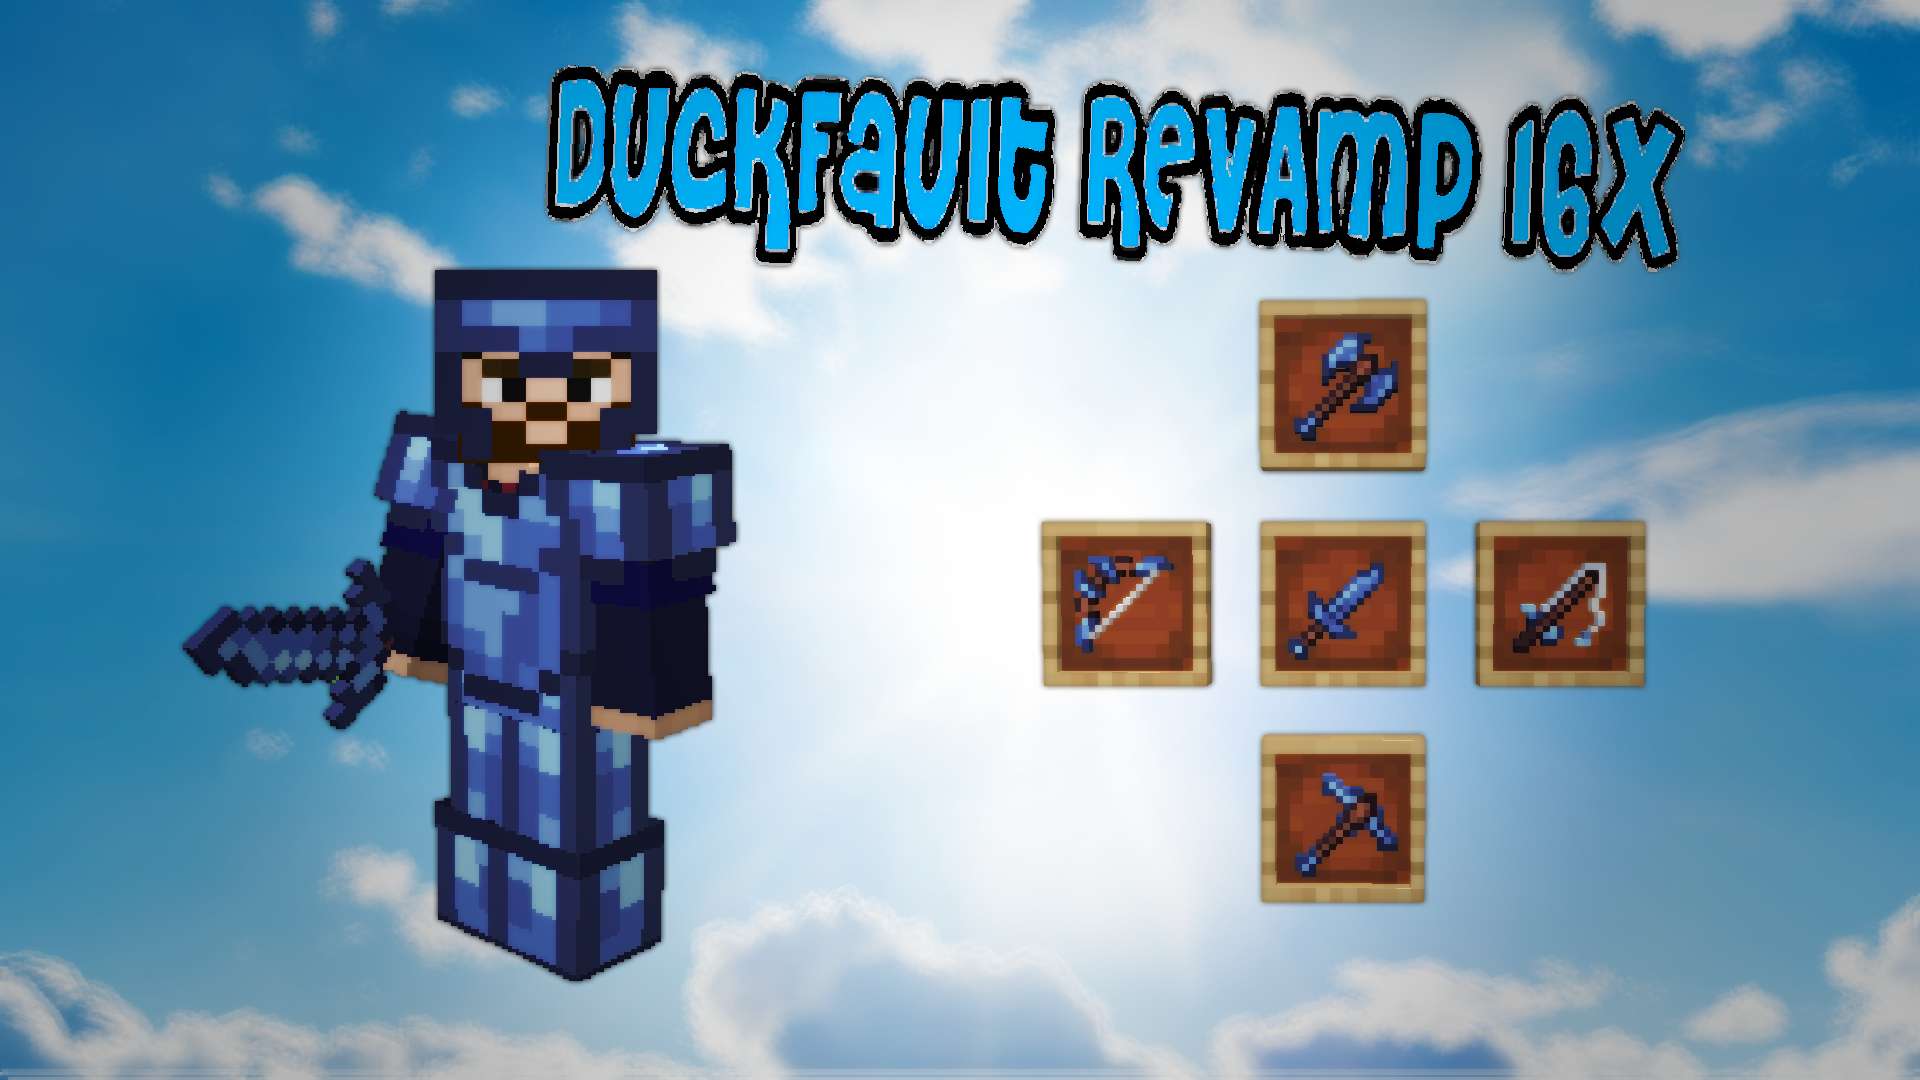 Gallery Banner for Duckfault REVAMP on PvPRP